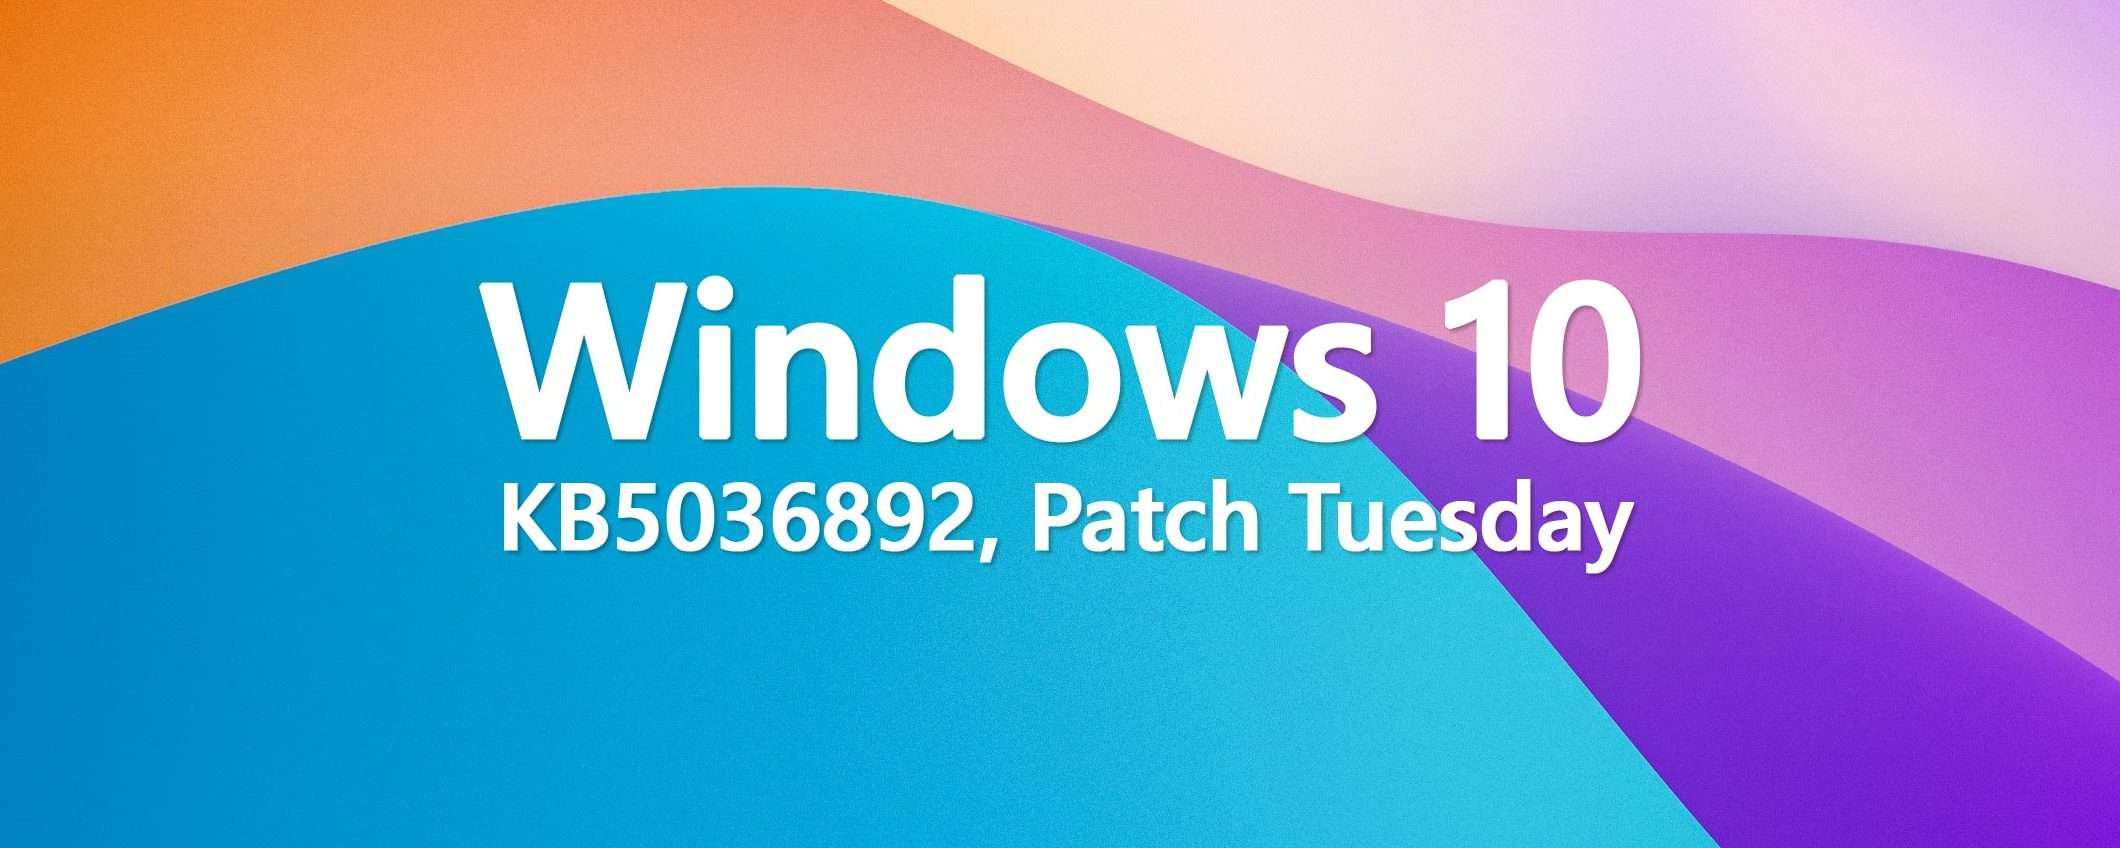 Windows 10 KB5036892: in download il nuovo Patch Tuesday